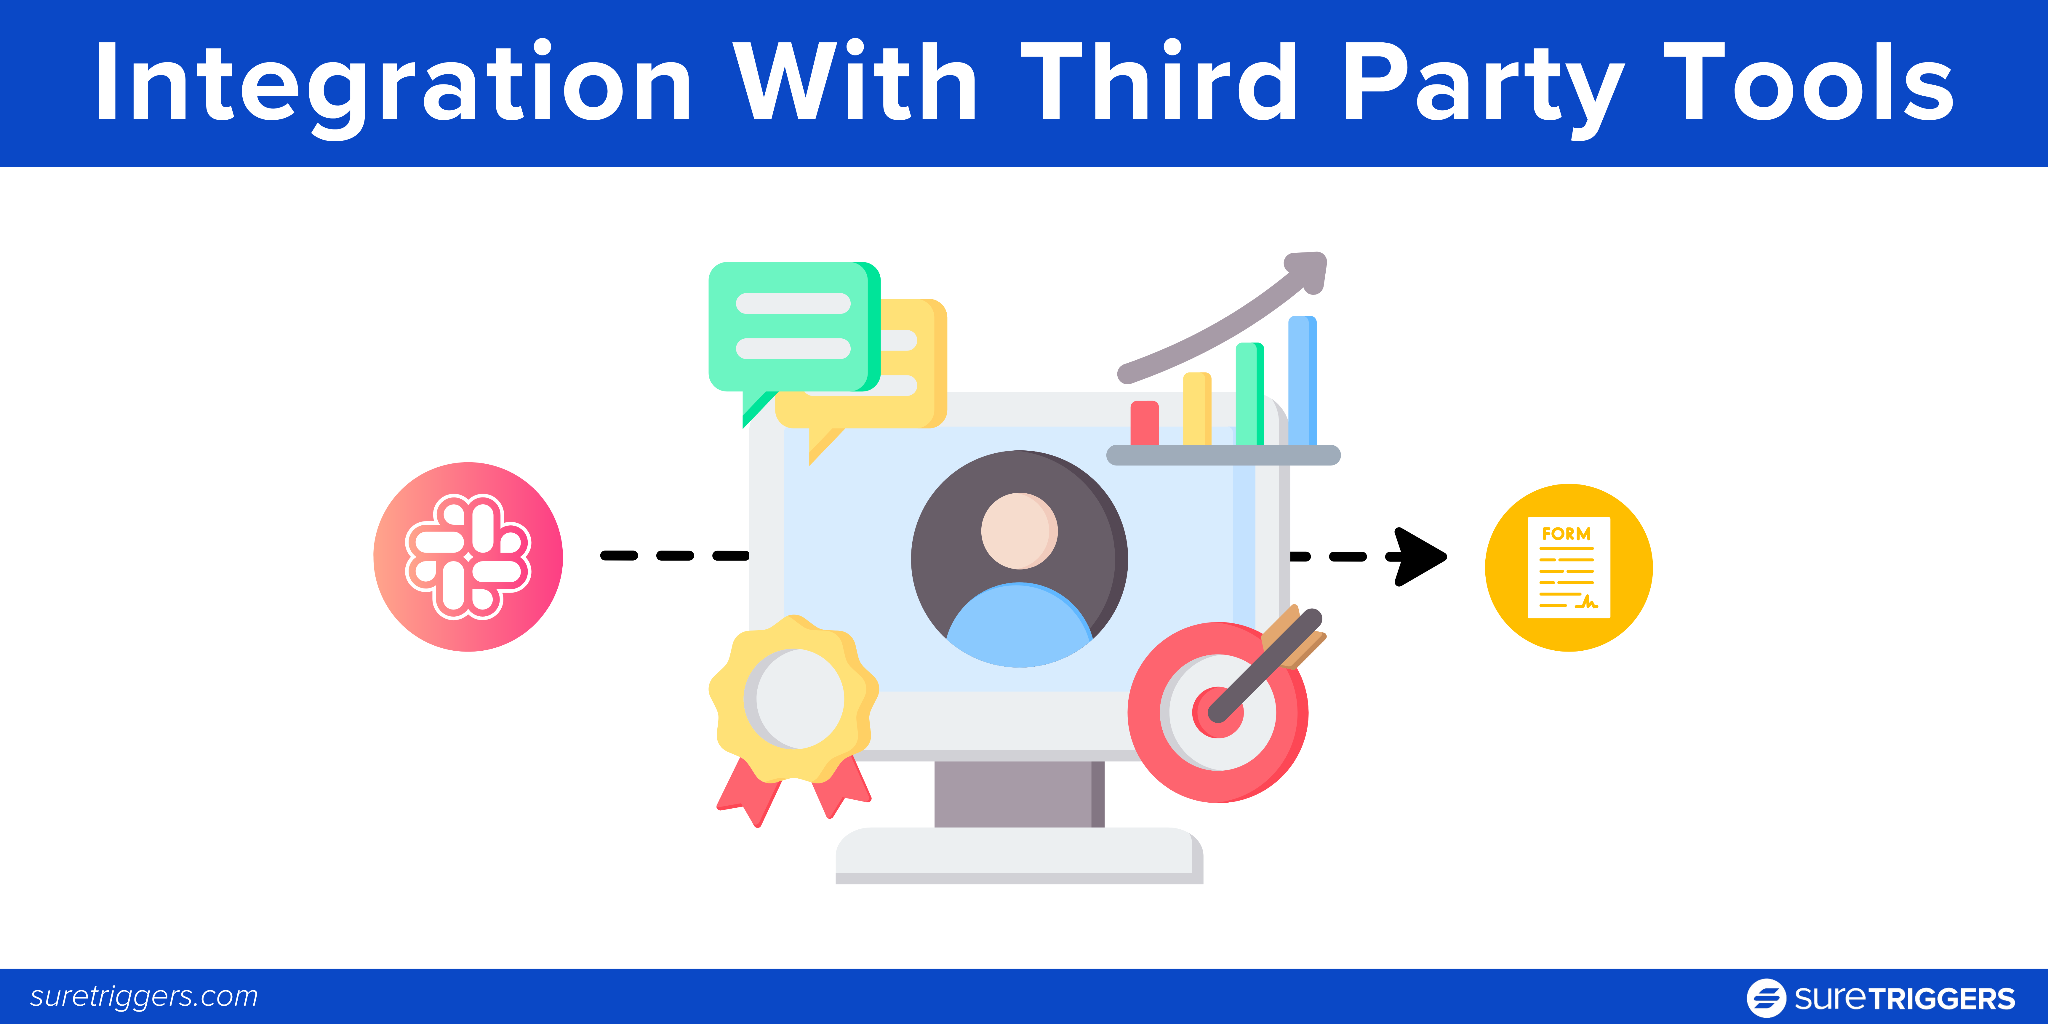 Integration with Third-Party Tools: Making Tools Talk
